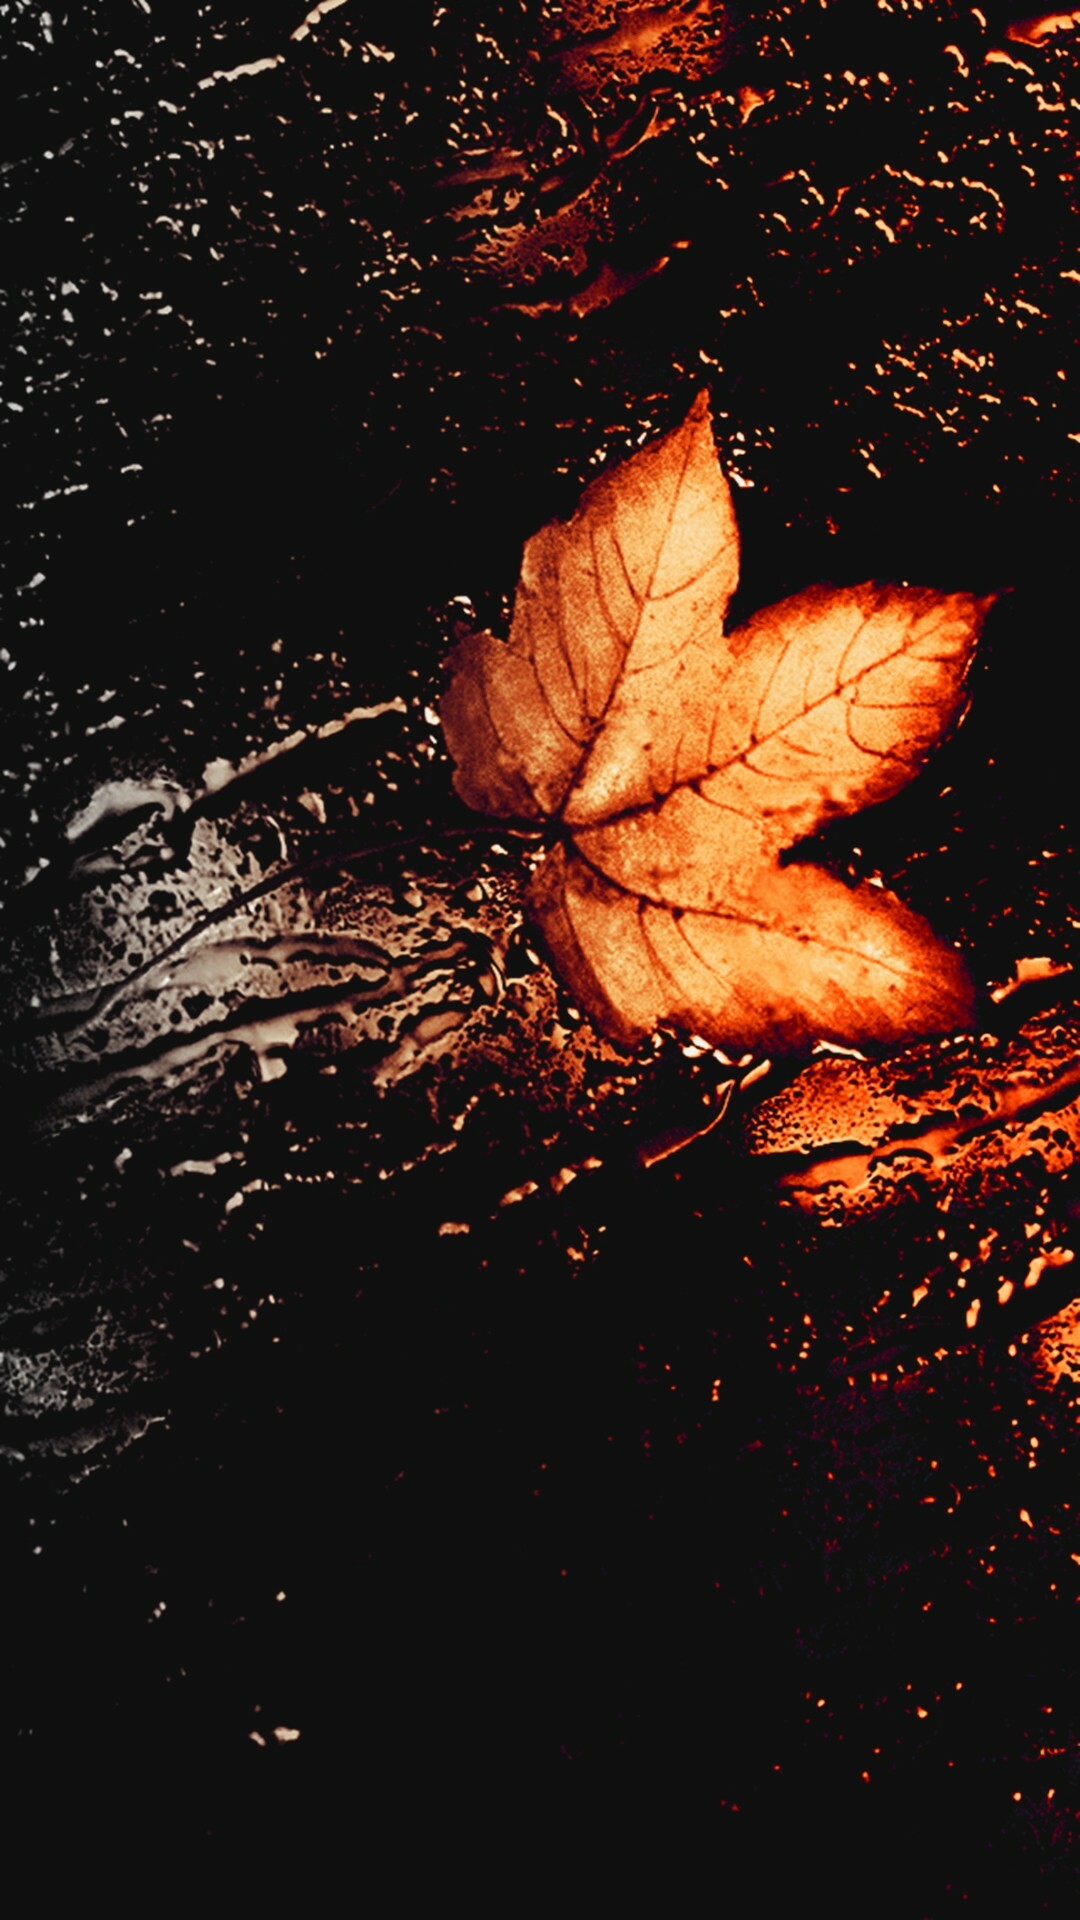 Leaves: Dying and rotting leaf, Brown rusty foliage. 1080x1920 Full HD Wallpaper.